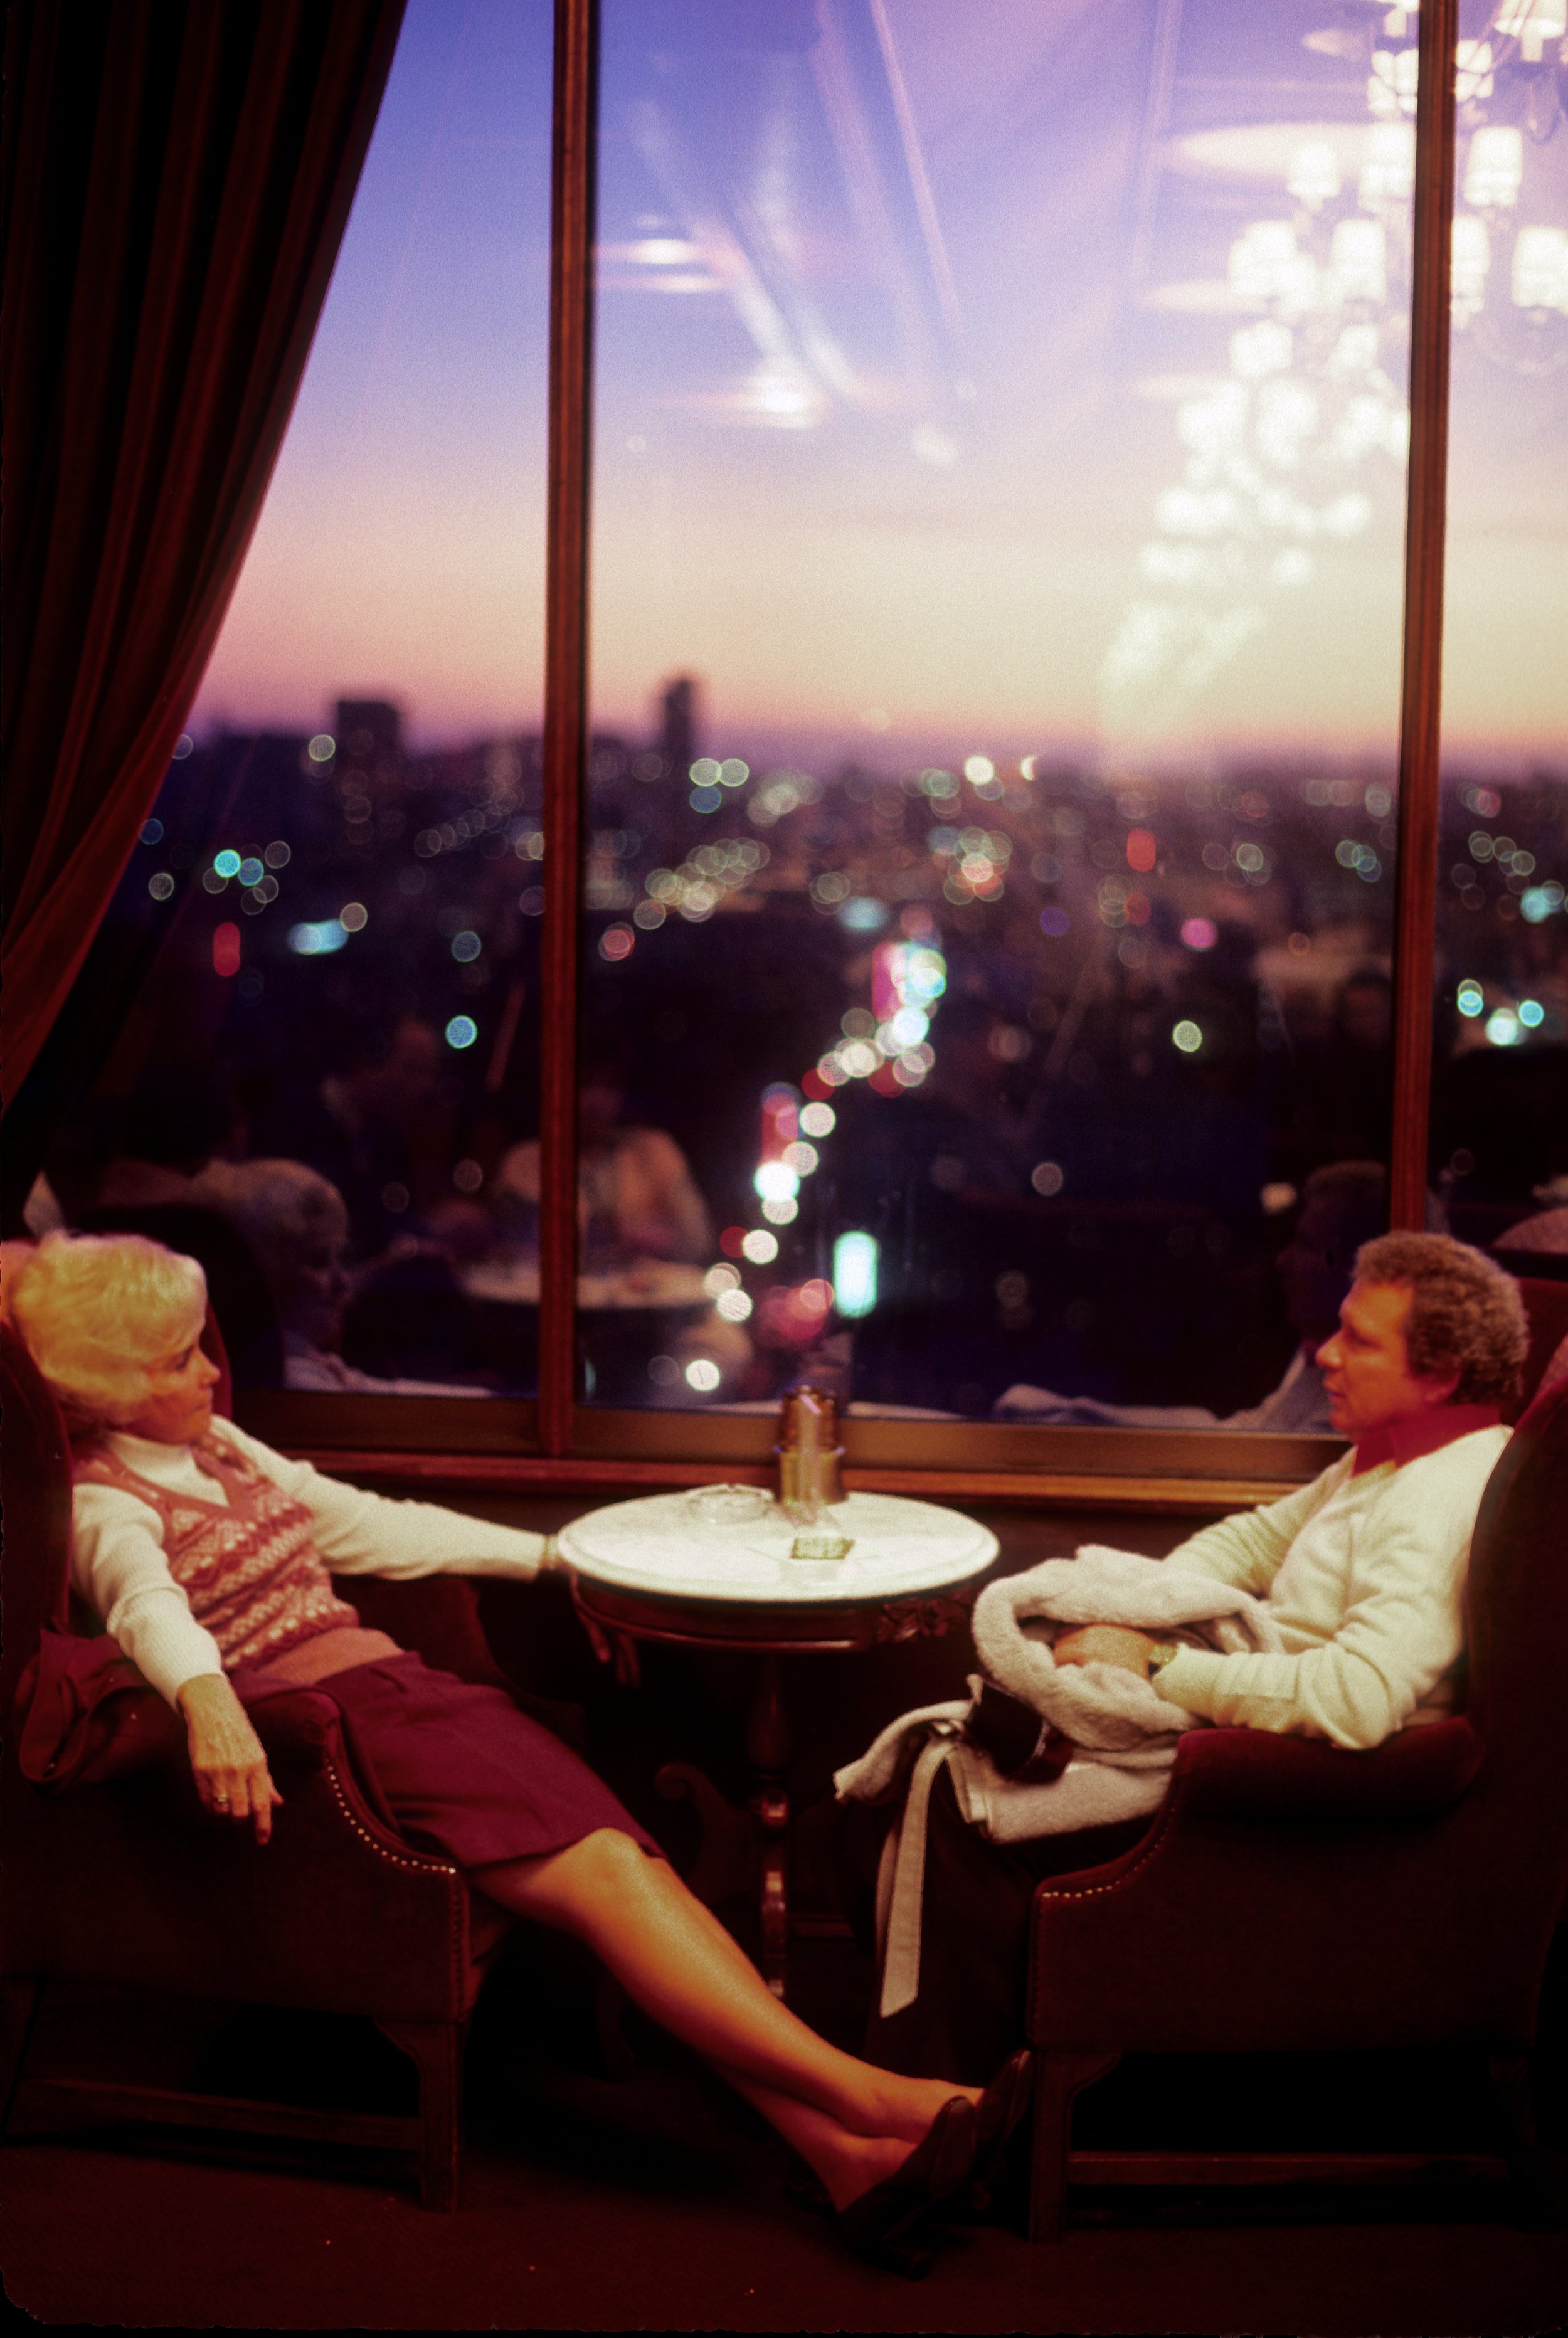  Two guests at the Sherlock Holmes restaurant at the top of the Holiday Inn hotel in San Francisco. 1985 